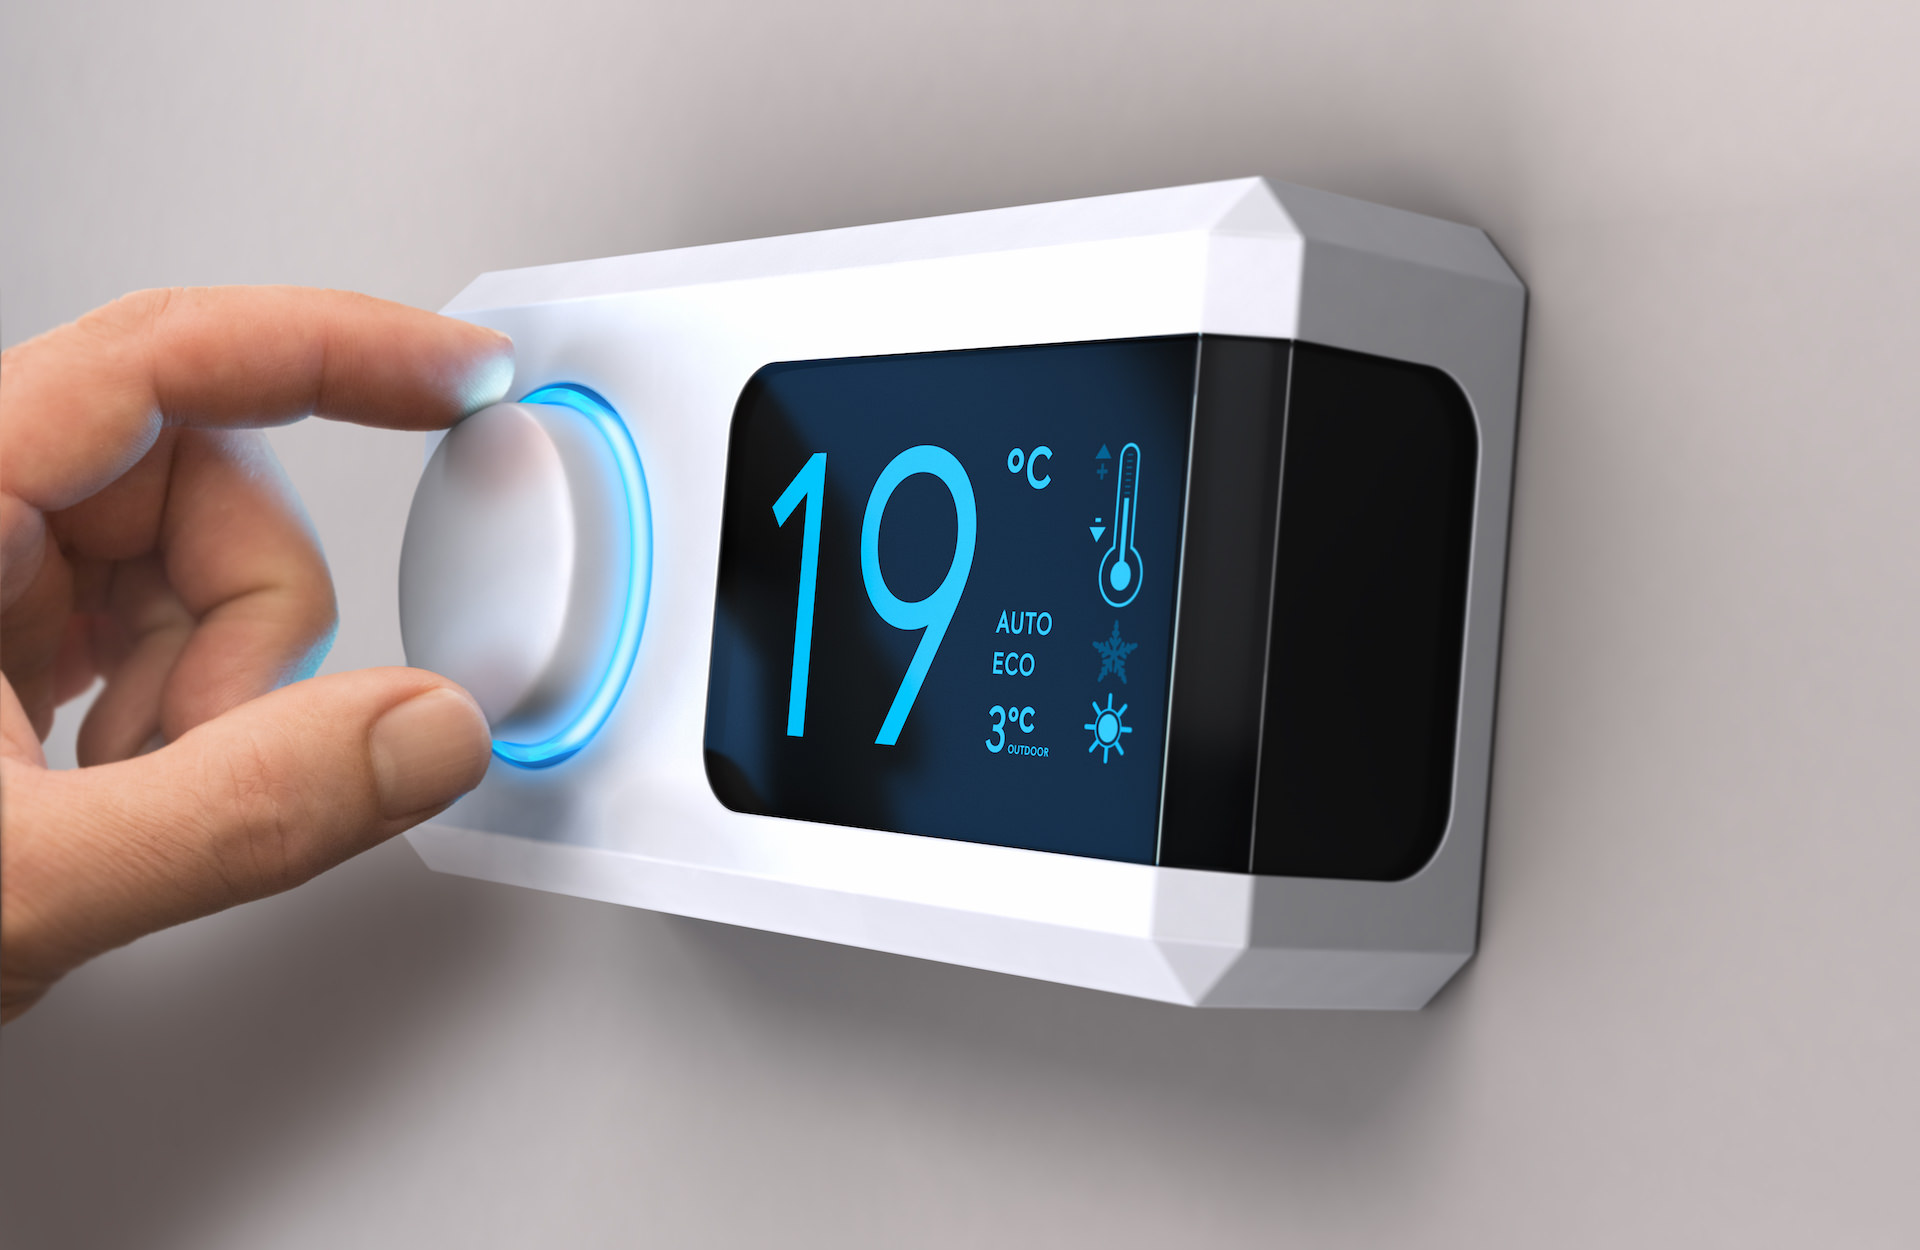 Hand turning a home thermostat knob to set temperature on energy saving mode. celcius units. Composite image between a photography and a 3D background.